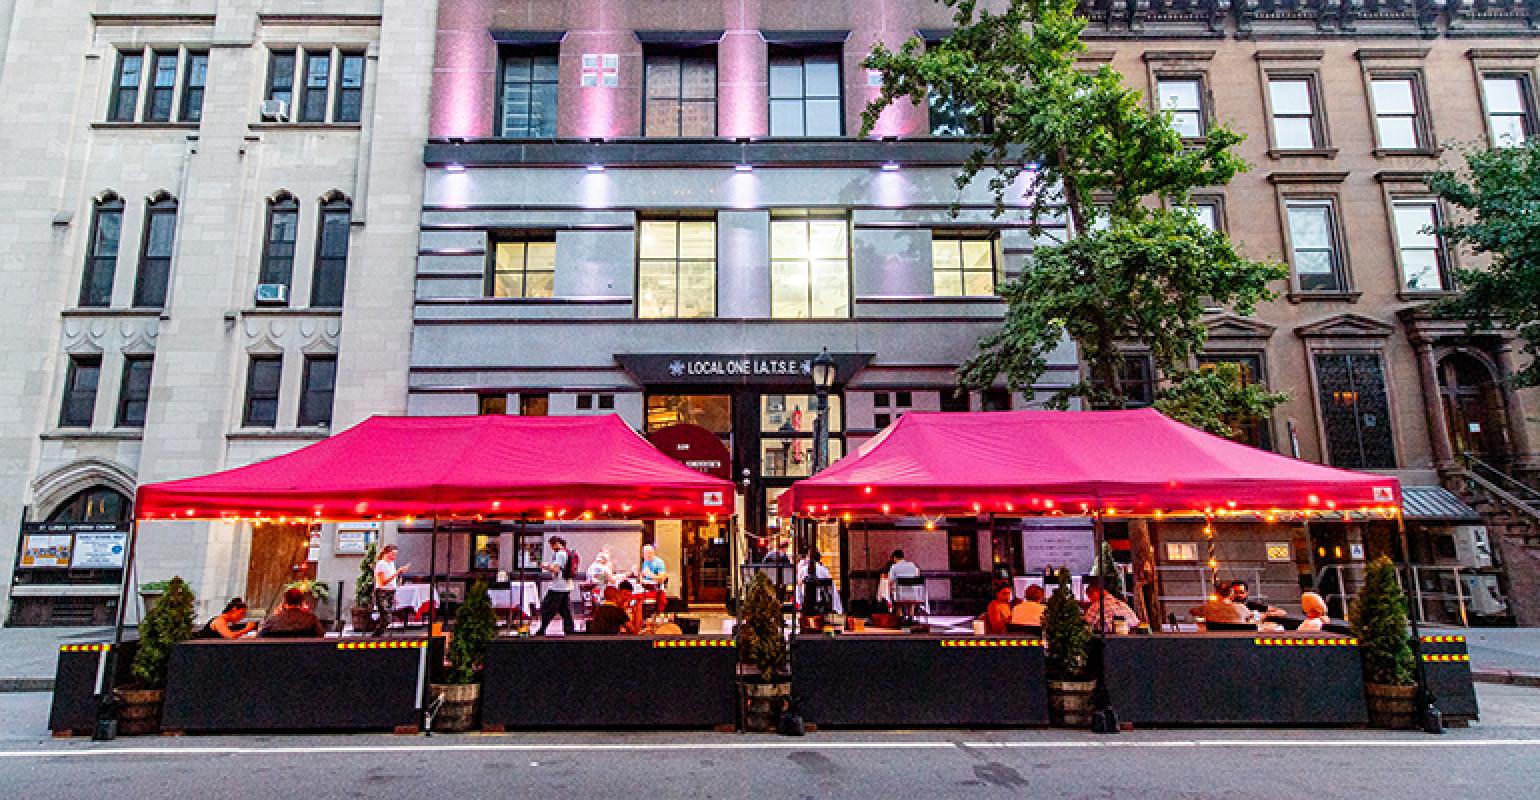 Community Op-Ed by Eric Adams: Outdoor dining is here to stay in New York City